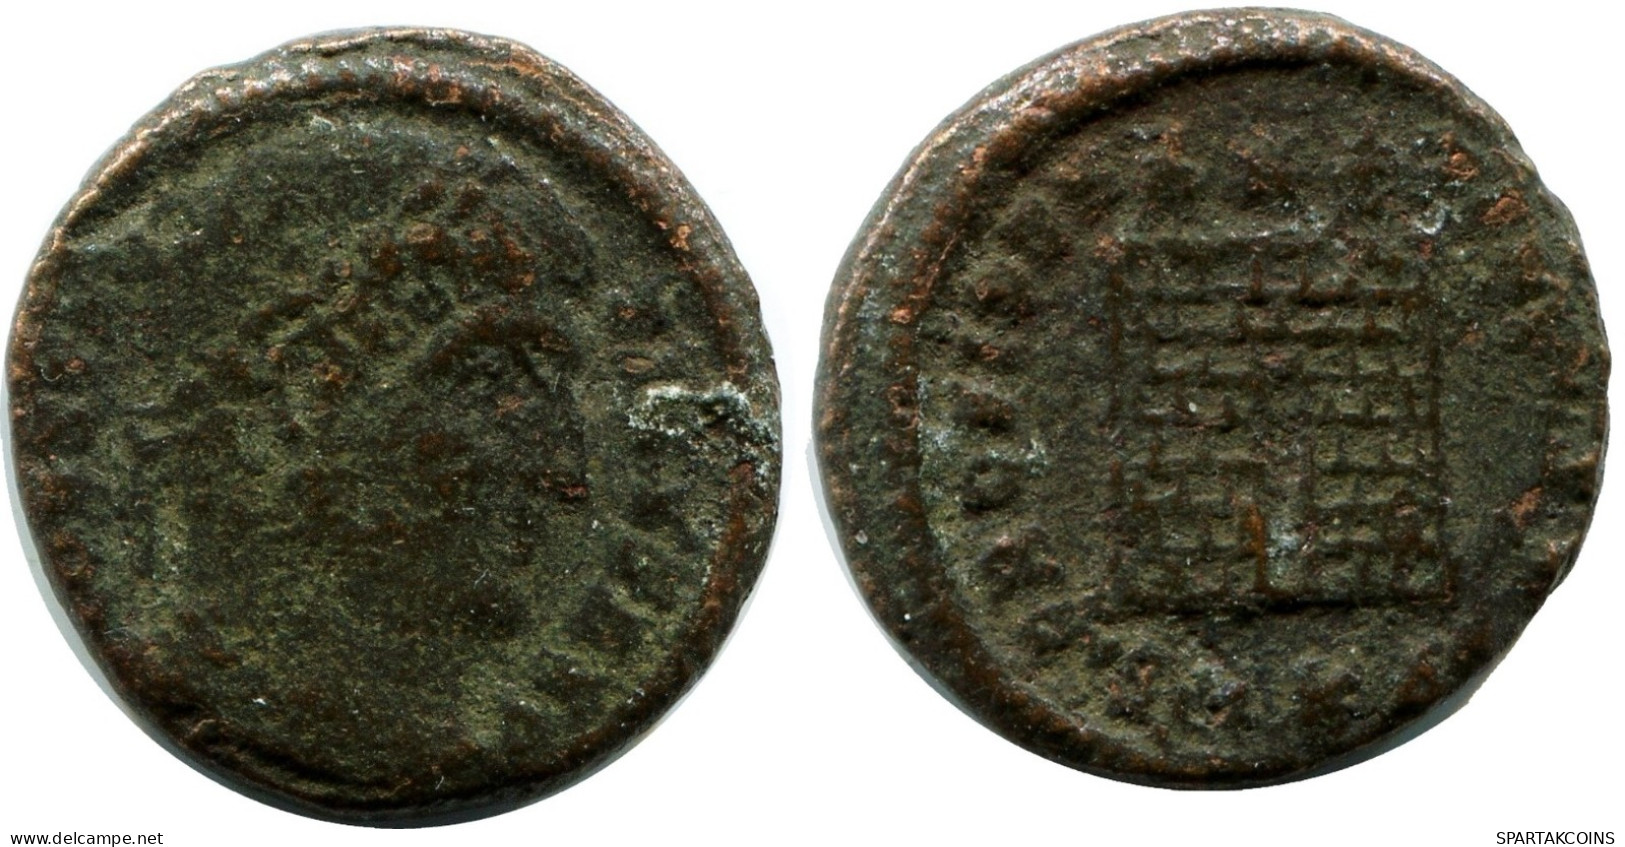 CONSTANTINE I MINTED IN CYZICUS FROM THE ROYAL ONTARIO MUSEUM #ANC11002.14.E.A - Der Christlischen Kaiser (307 / 363)